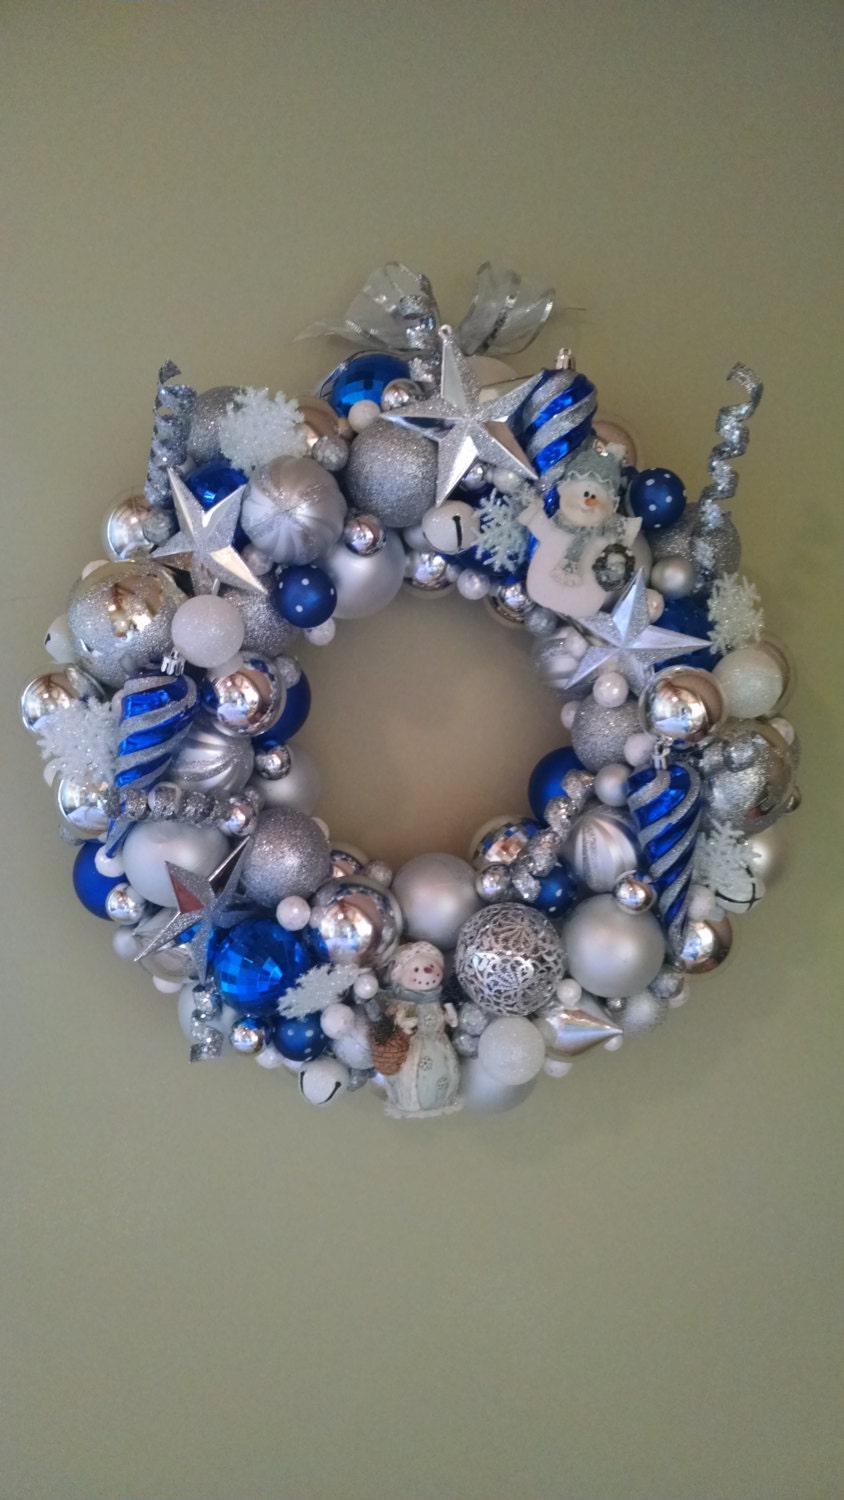 30% OFF SALE***Blue Christmas Ornament Wreath - White, Silver and Royal Blue Holiday Wreath